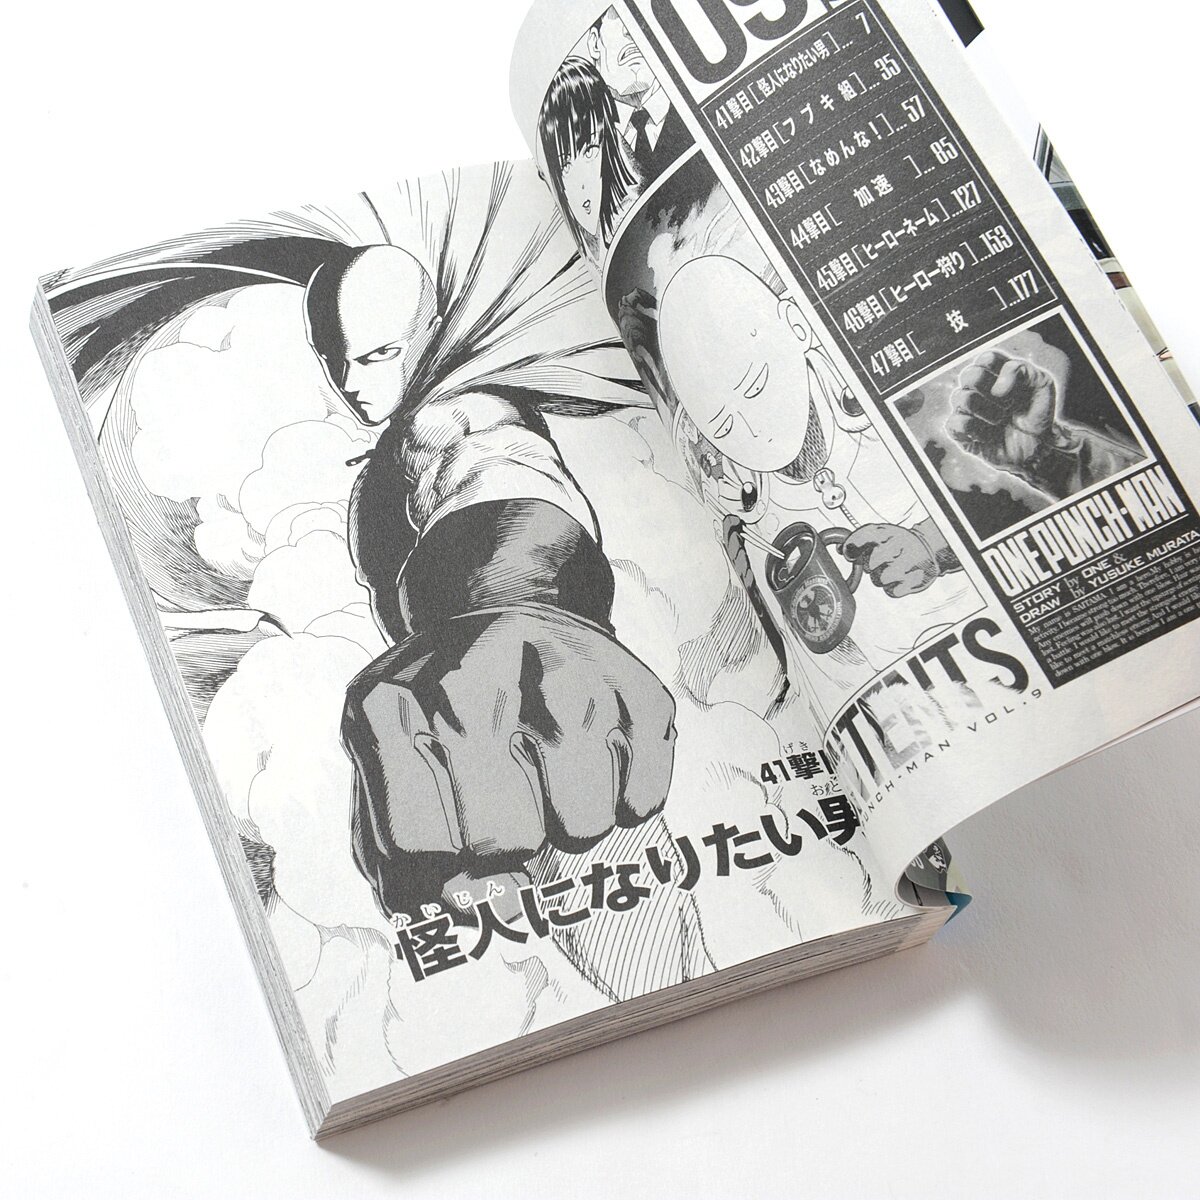 Onepunch-Man 85 Page 1  One punch man manga, One punch man anime, One punch